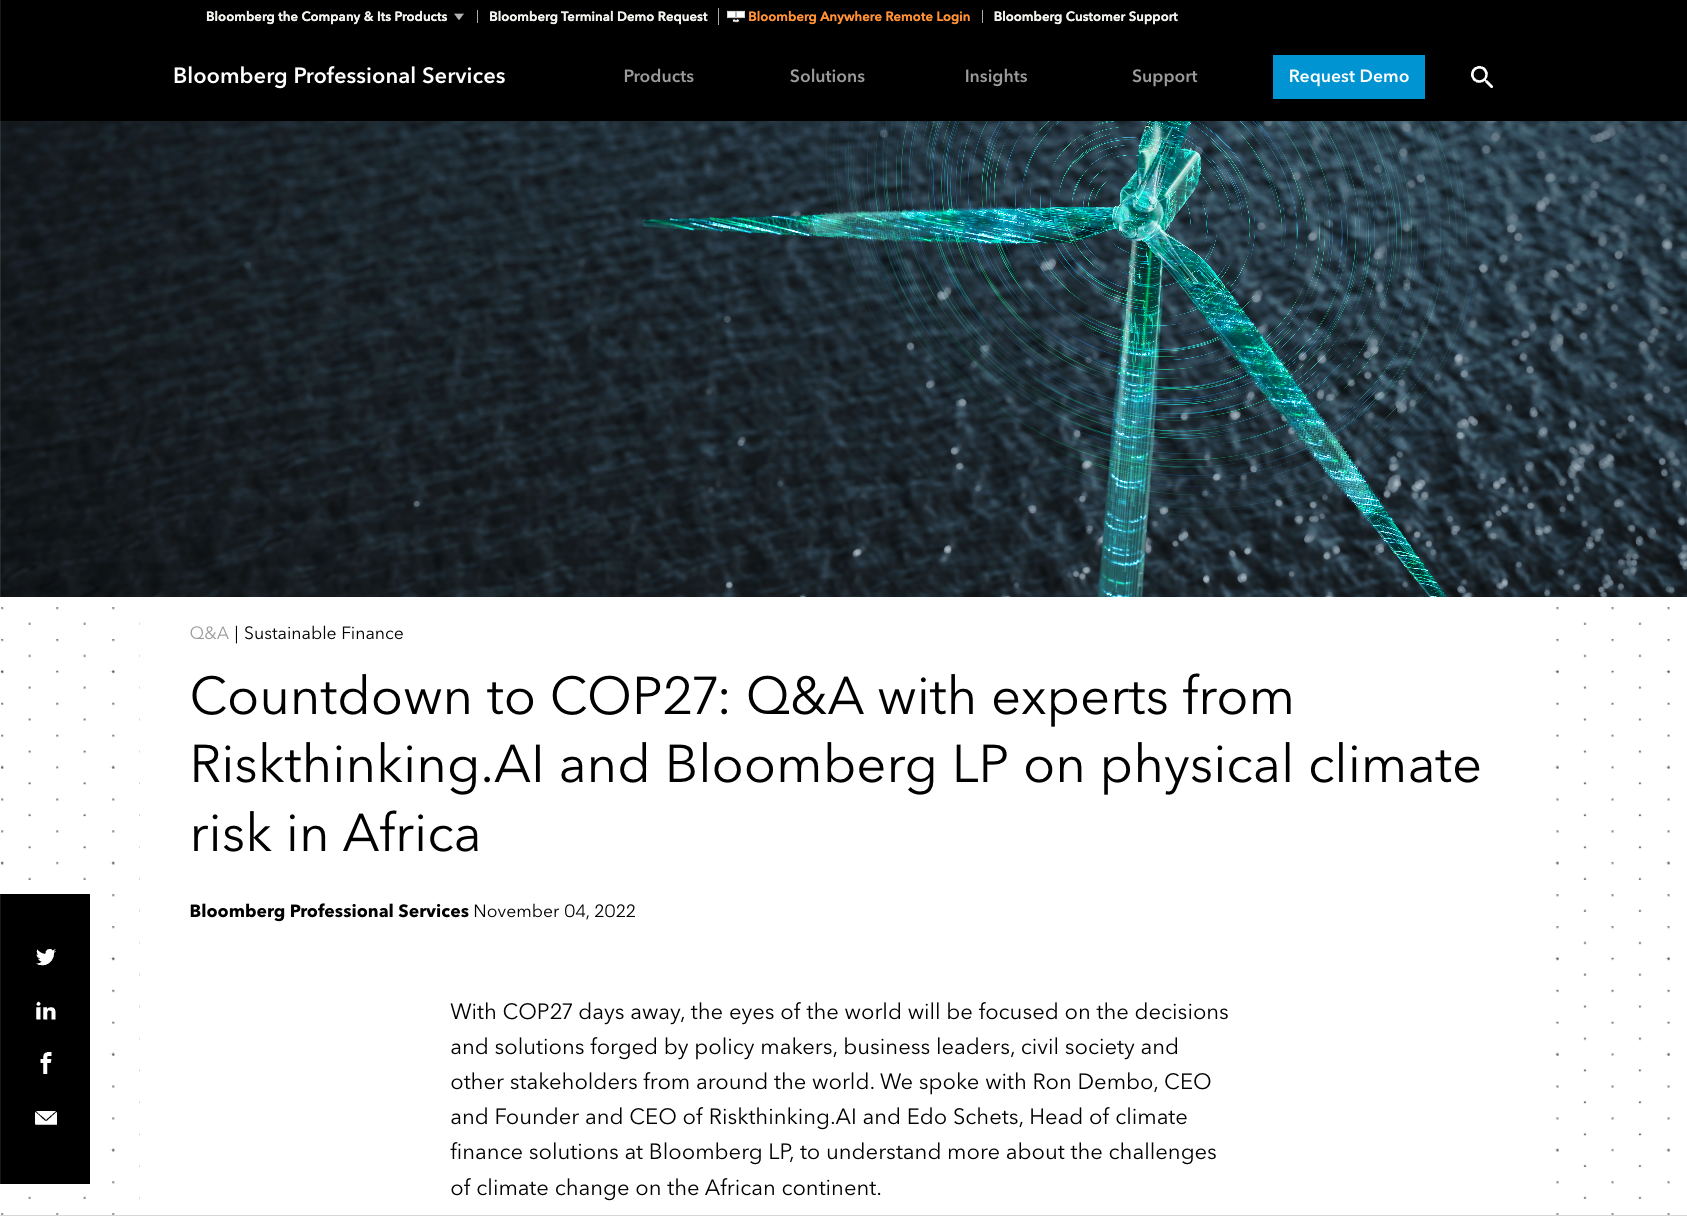 Countdown to COP27: Q&A with experts from Riskthinking.AI and Bloomberg LP on physical climate risk in Africa